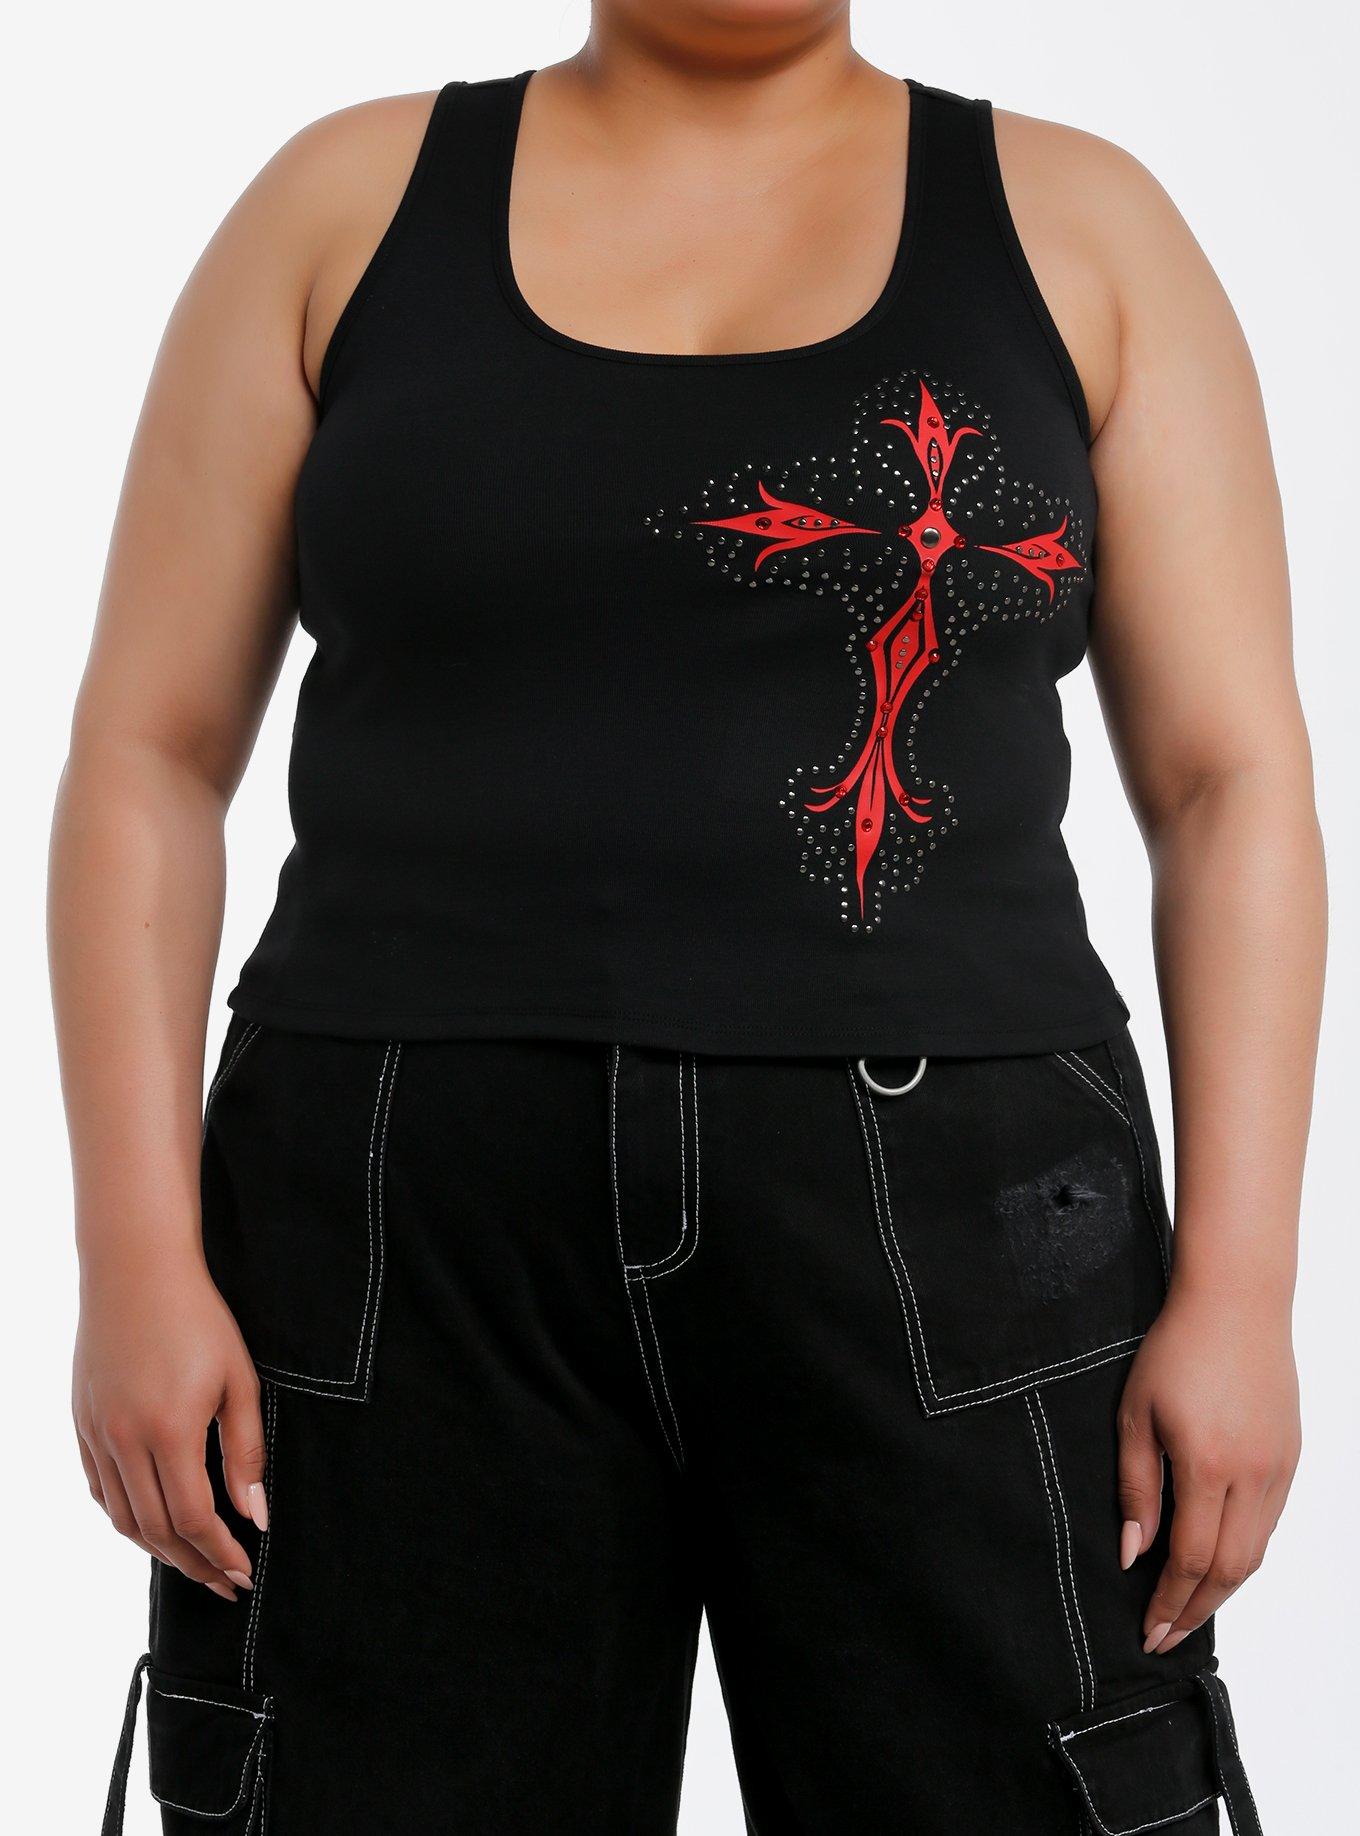 Social Collision Bedazzled Gothic Cross Girls Tank Top Plus Size, RED, hi-res